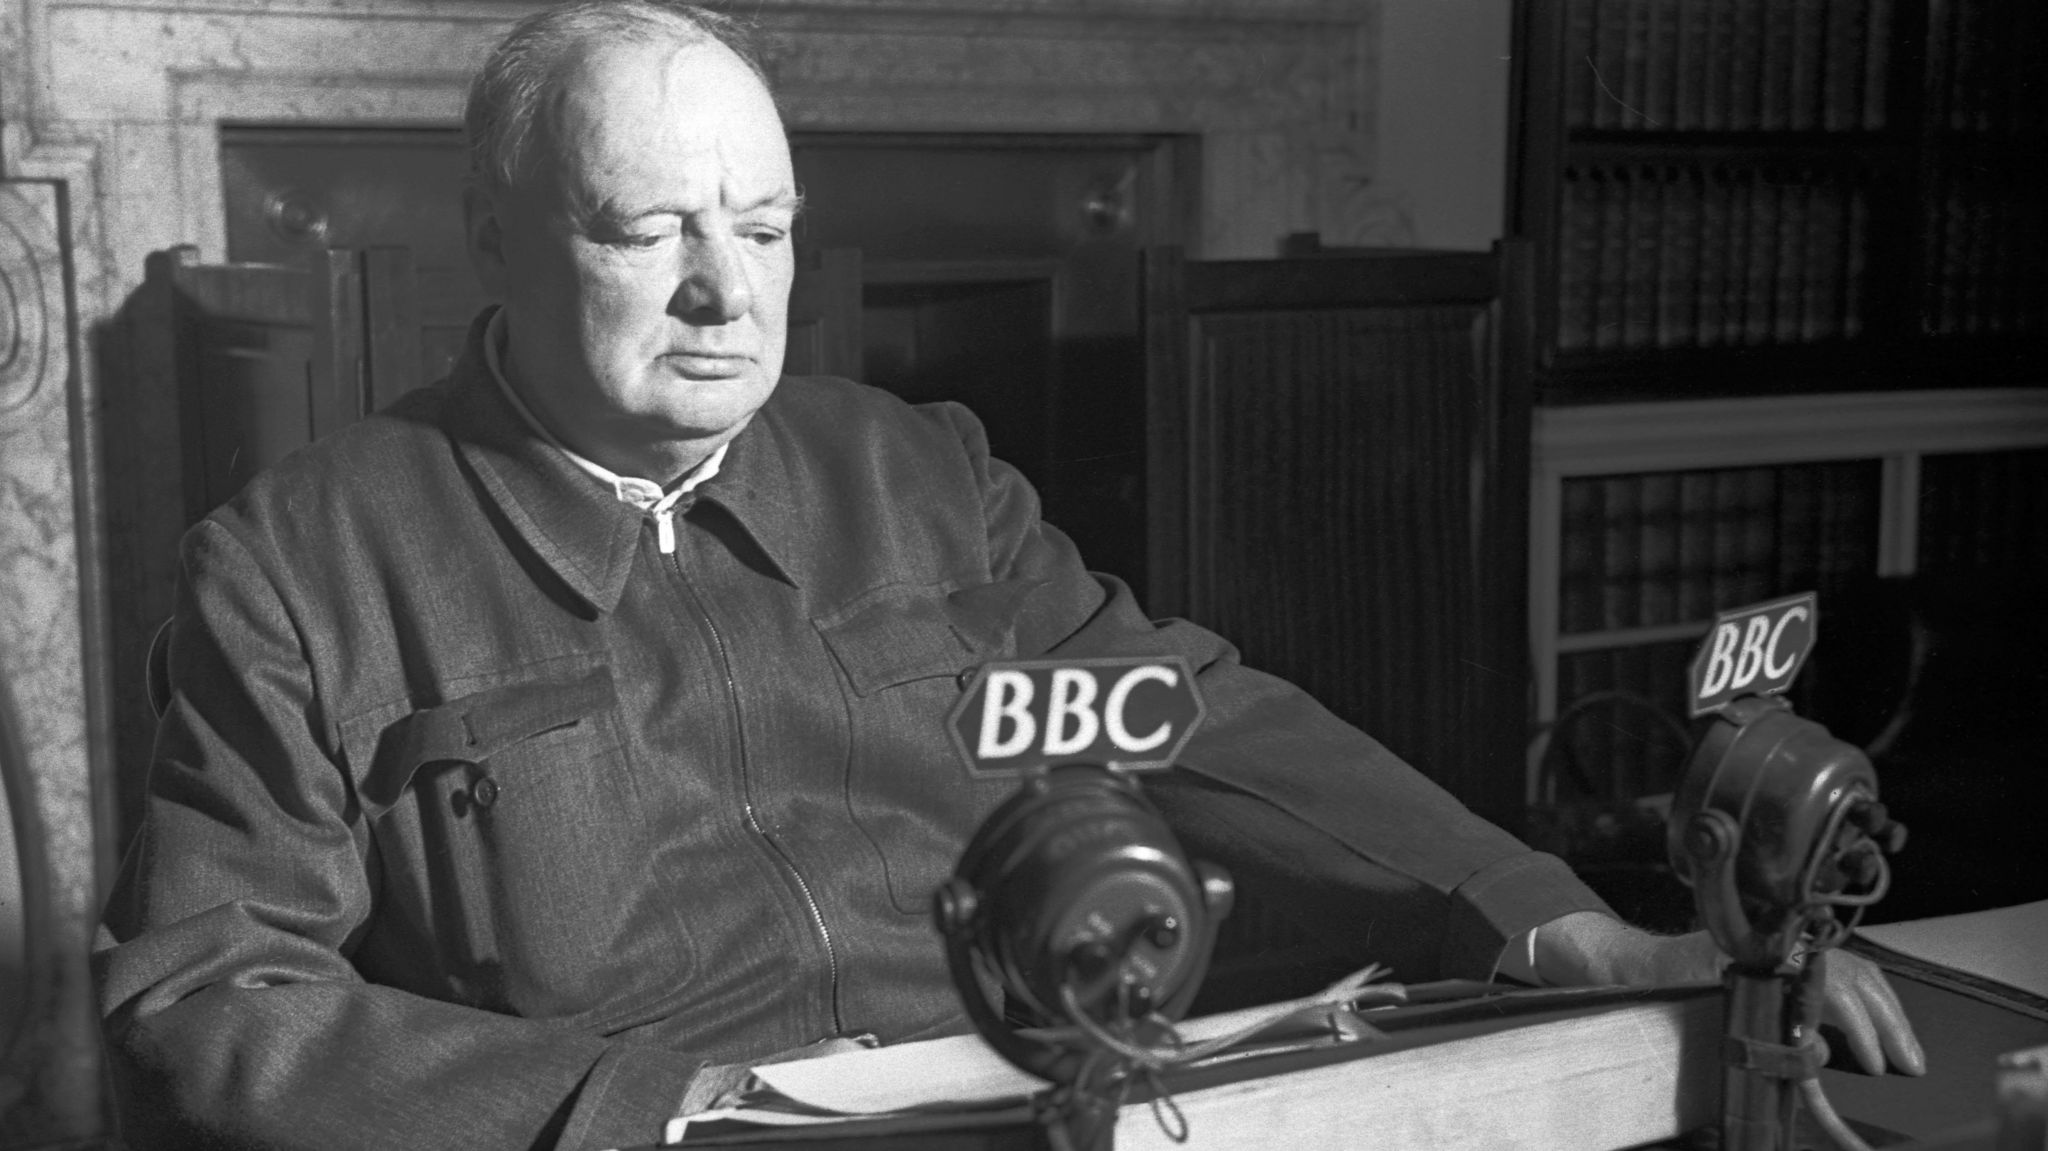 Winston Churchill sits in front of a BBC microphone during Second World War (1942) in a black and white image